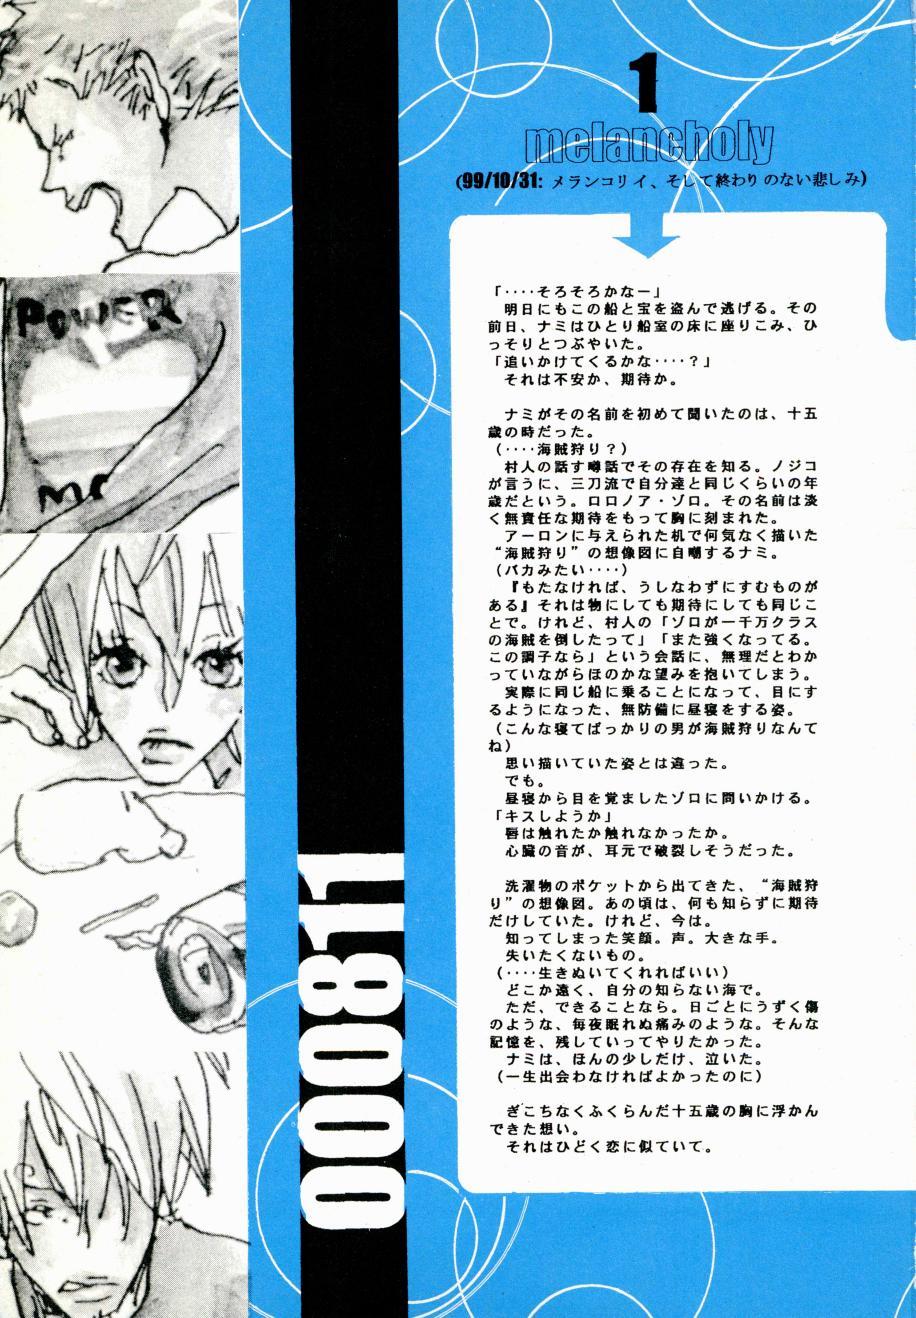 Chile Heliotrope |日光菊 - One piece Lolicon - Page 4